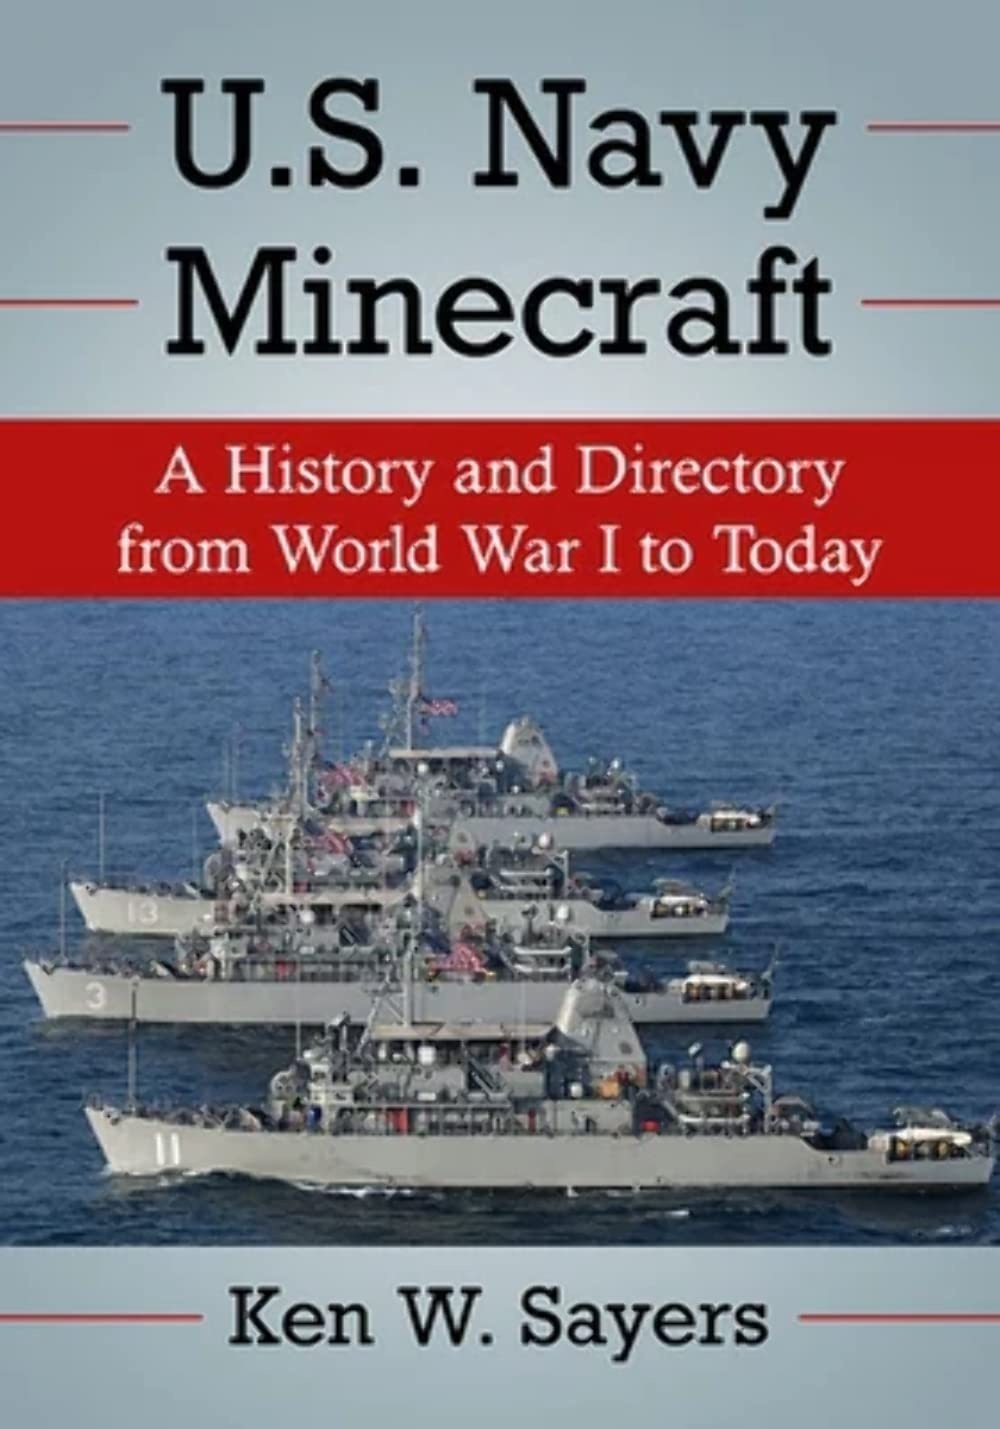 U.S. Navy Minecraft: A History and Directory from World War I to Today